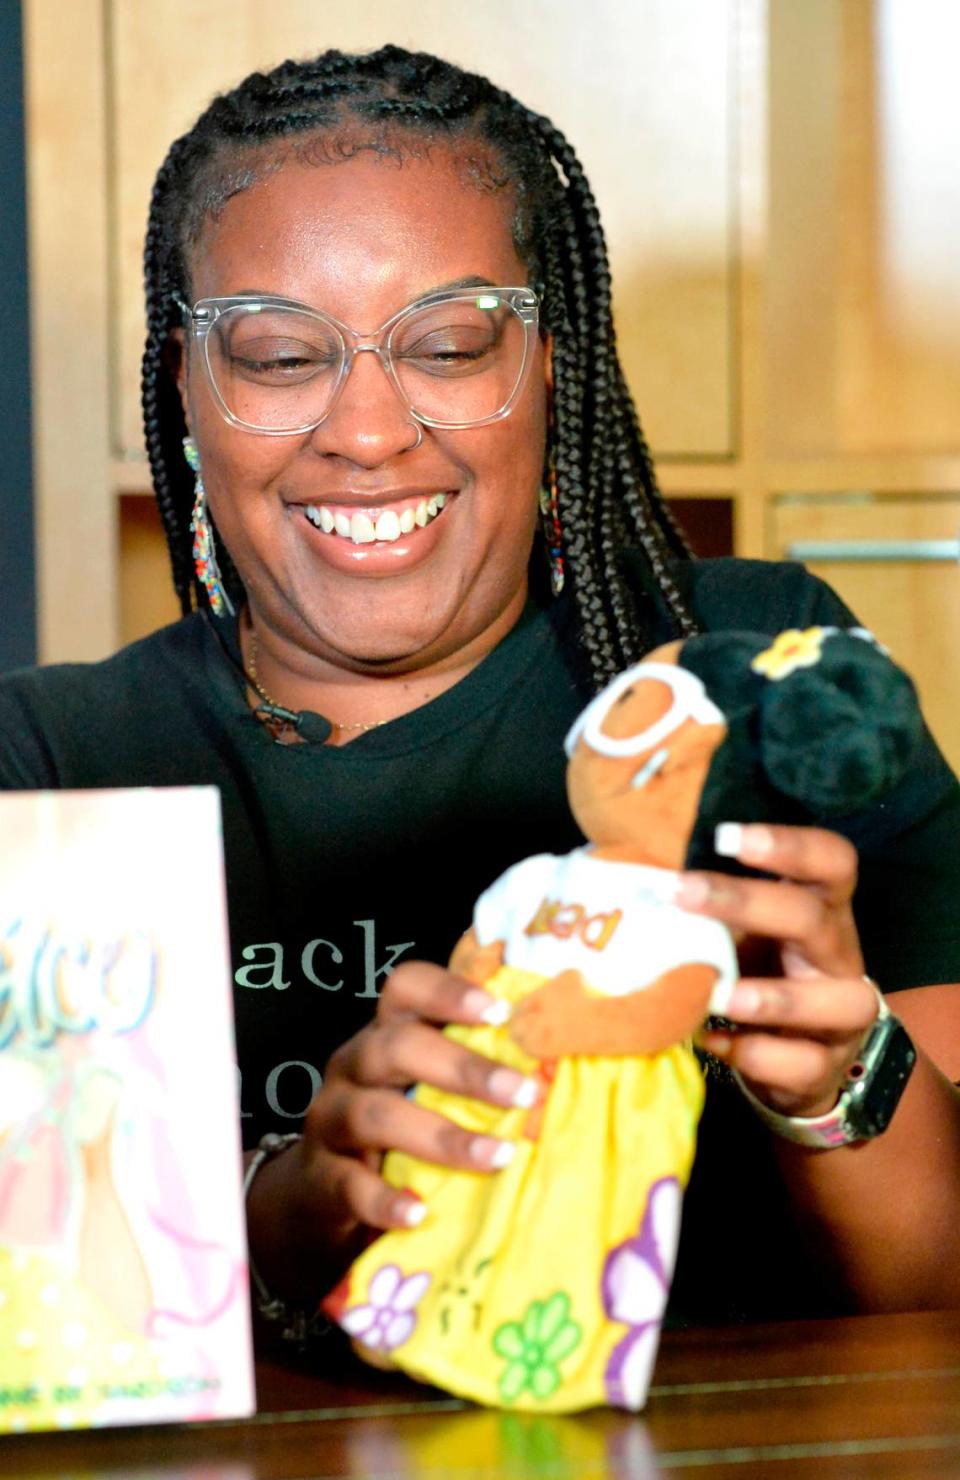 Research says that 70% of children’s books are either of white characters or animals, so when school teacher Dayonne Nicholas Richardson started writing children’s books she created Black and brown characters who look like many of the students she sees in her classrooms.